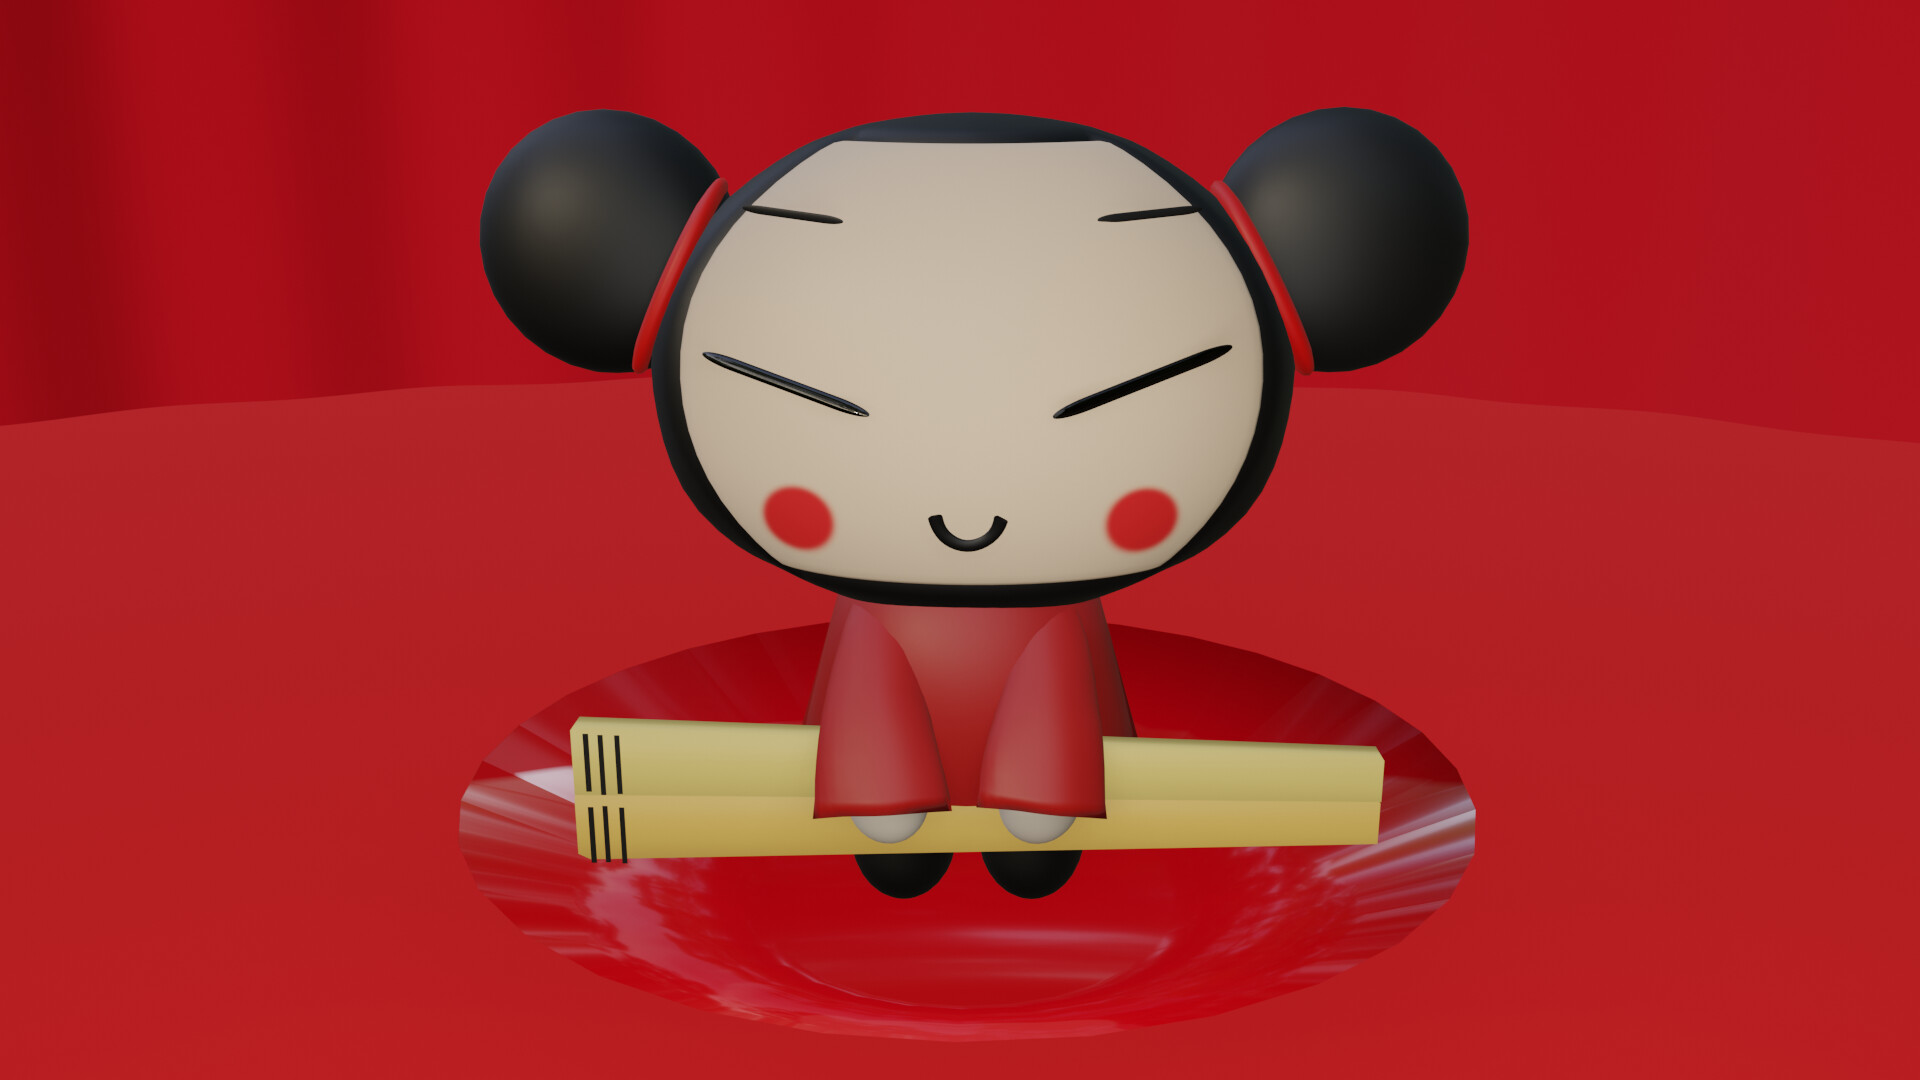 Pucca Punk - Other & Anime Background Wallpapers on Desktop Nexus (Image  386237)